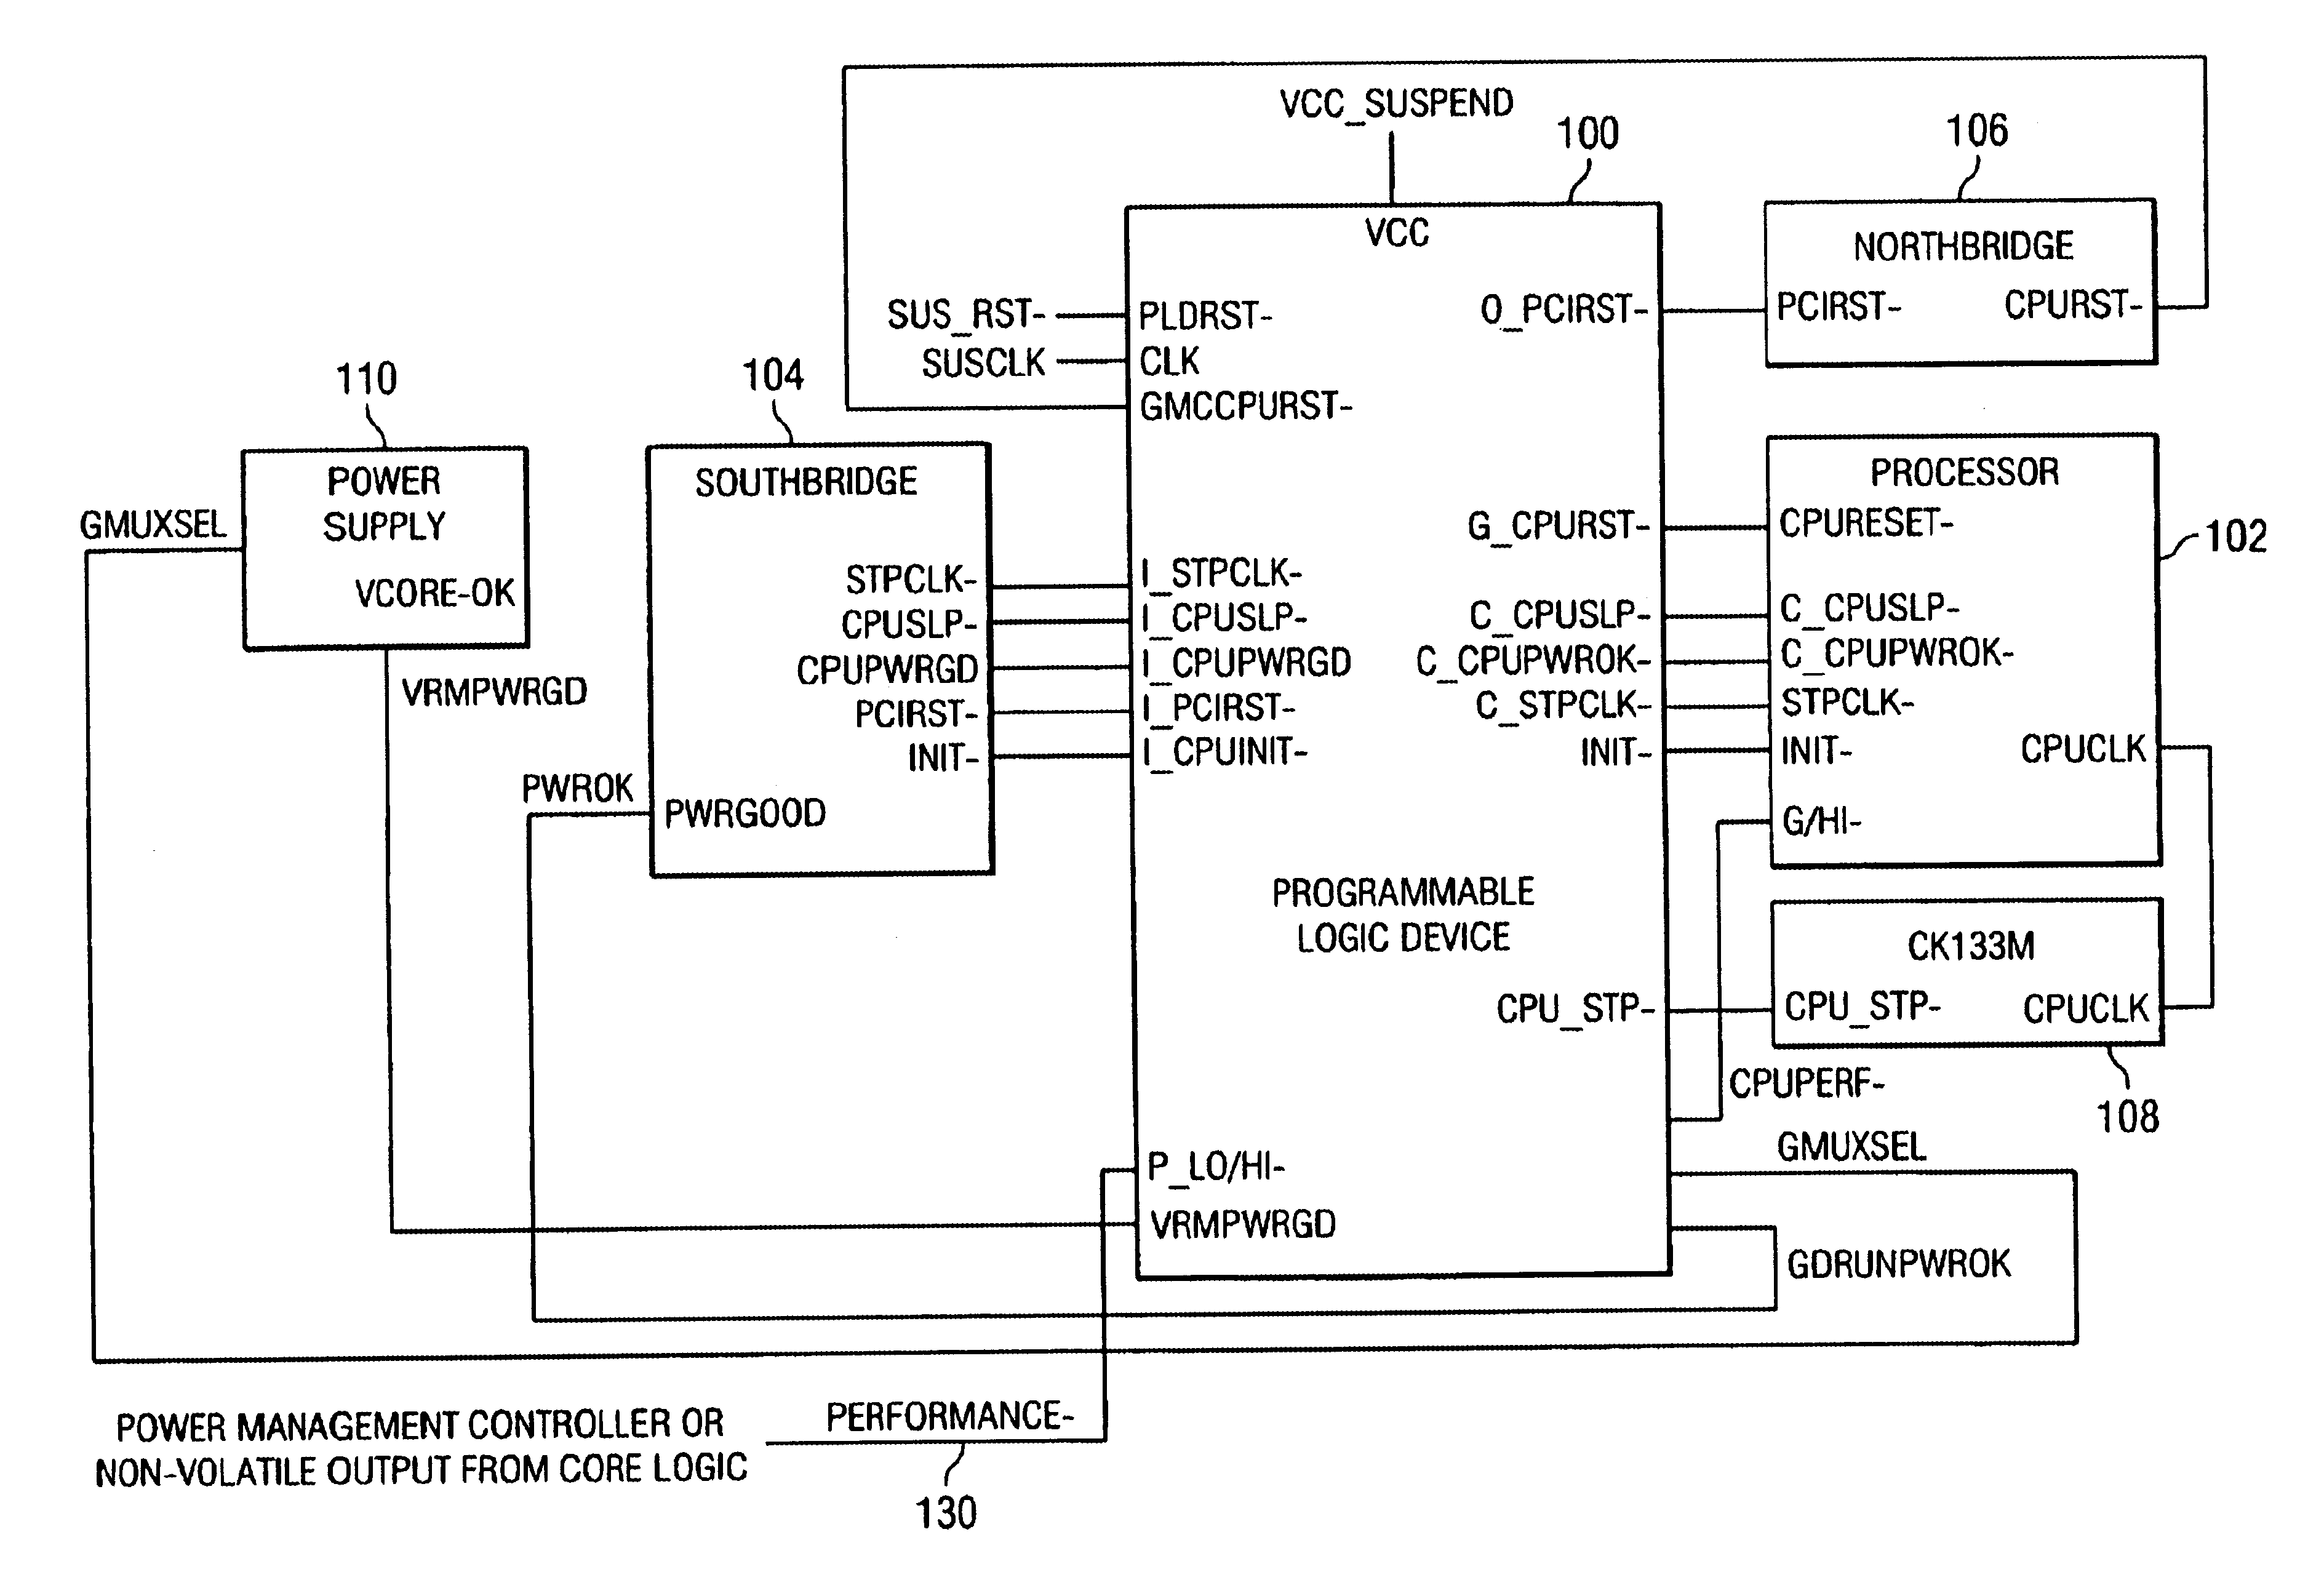 Processor power state transistions using separate logic control